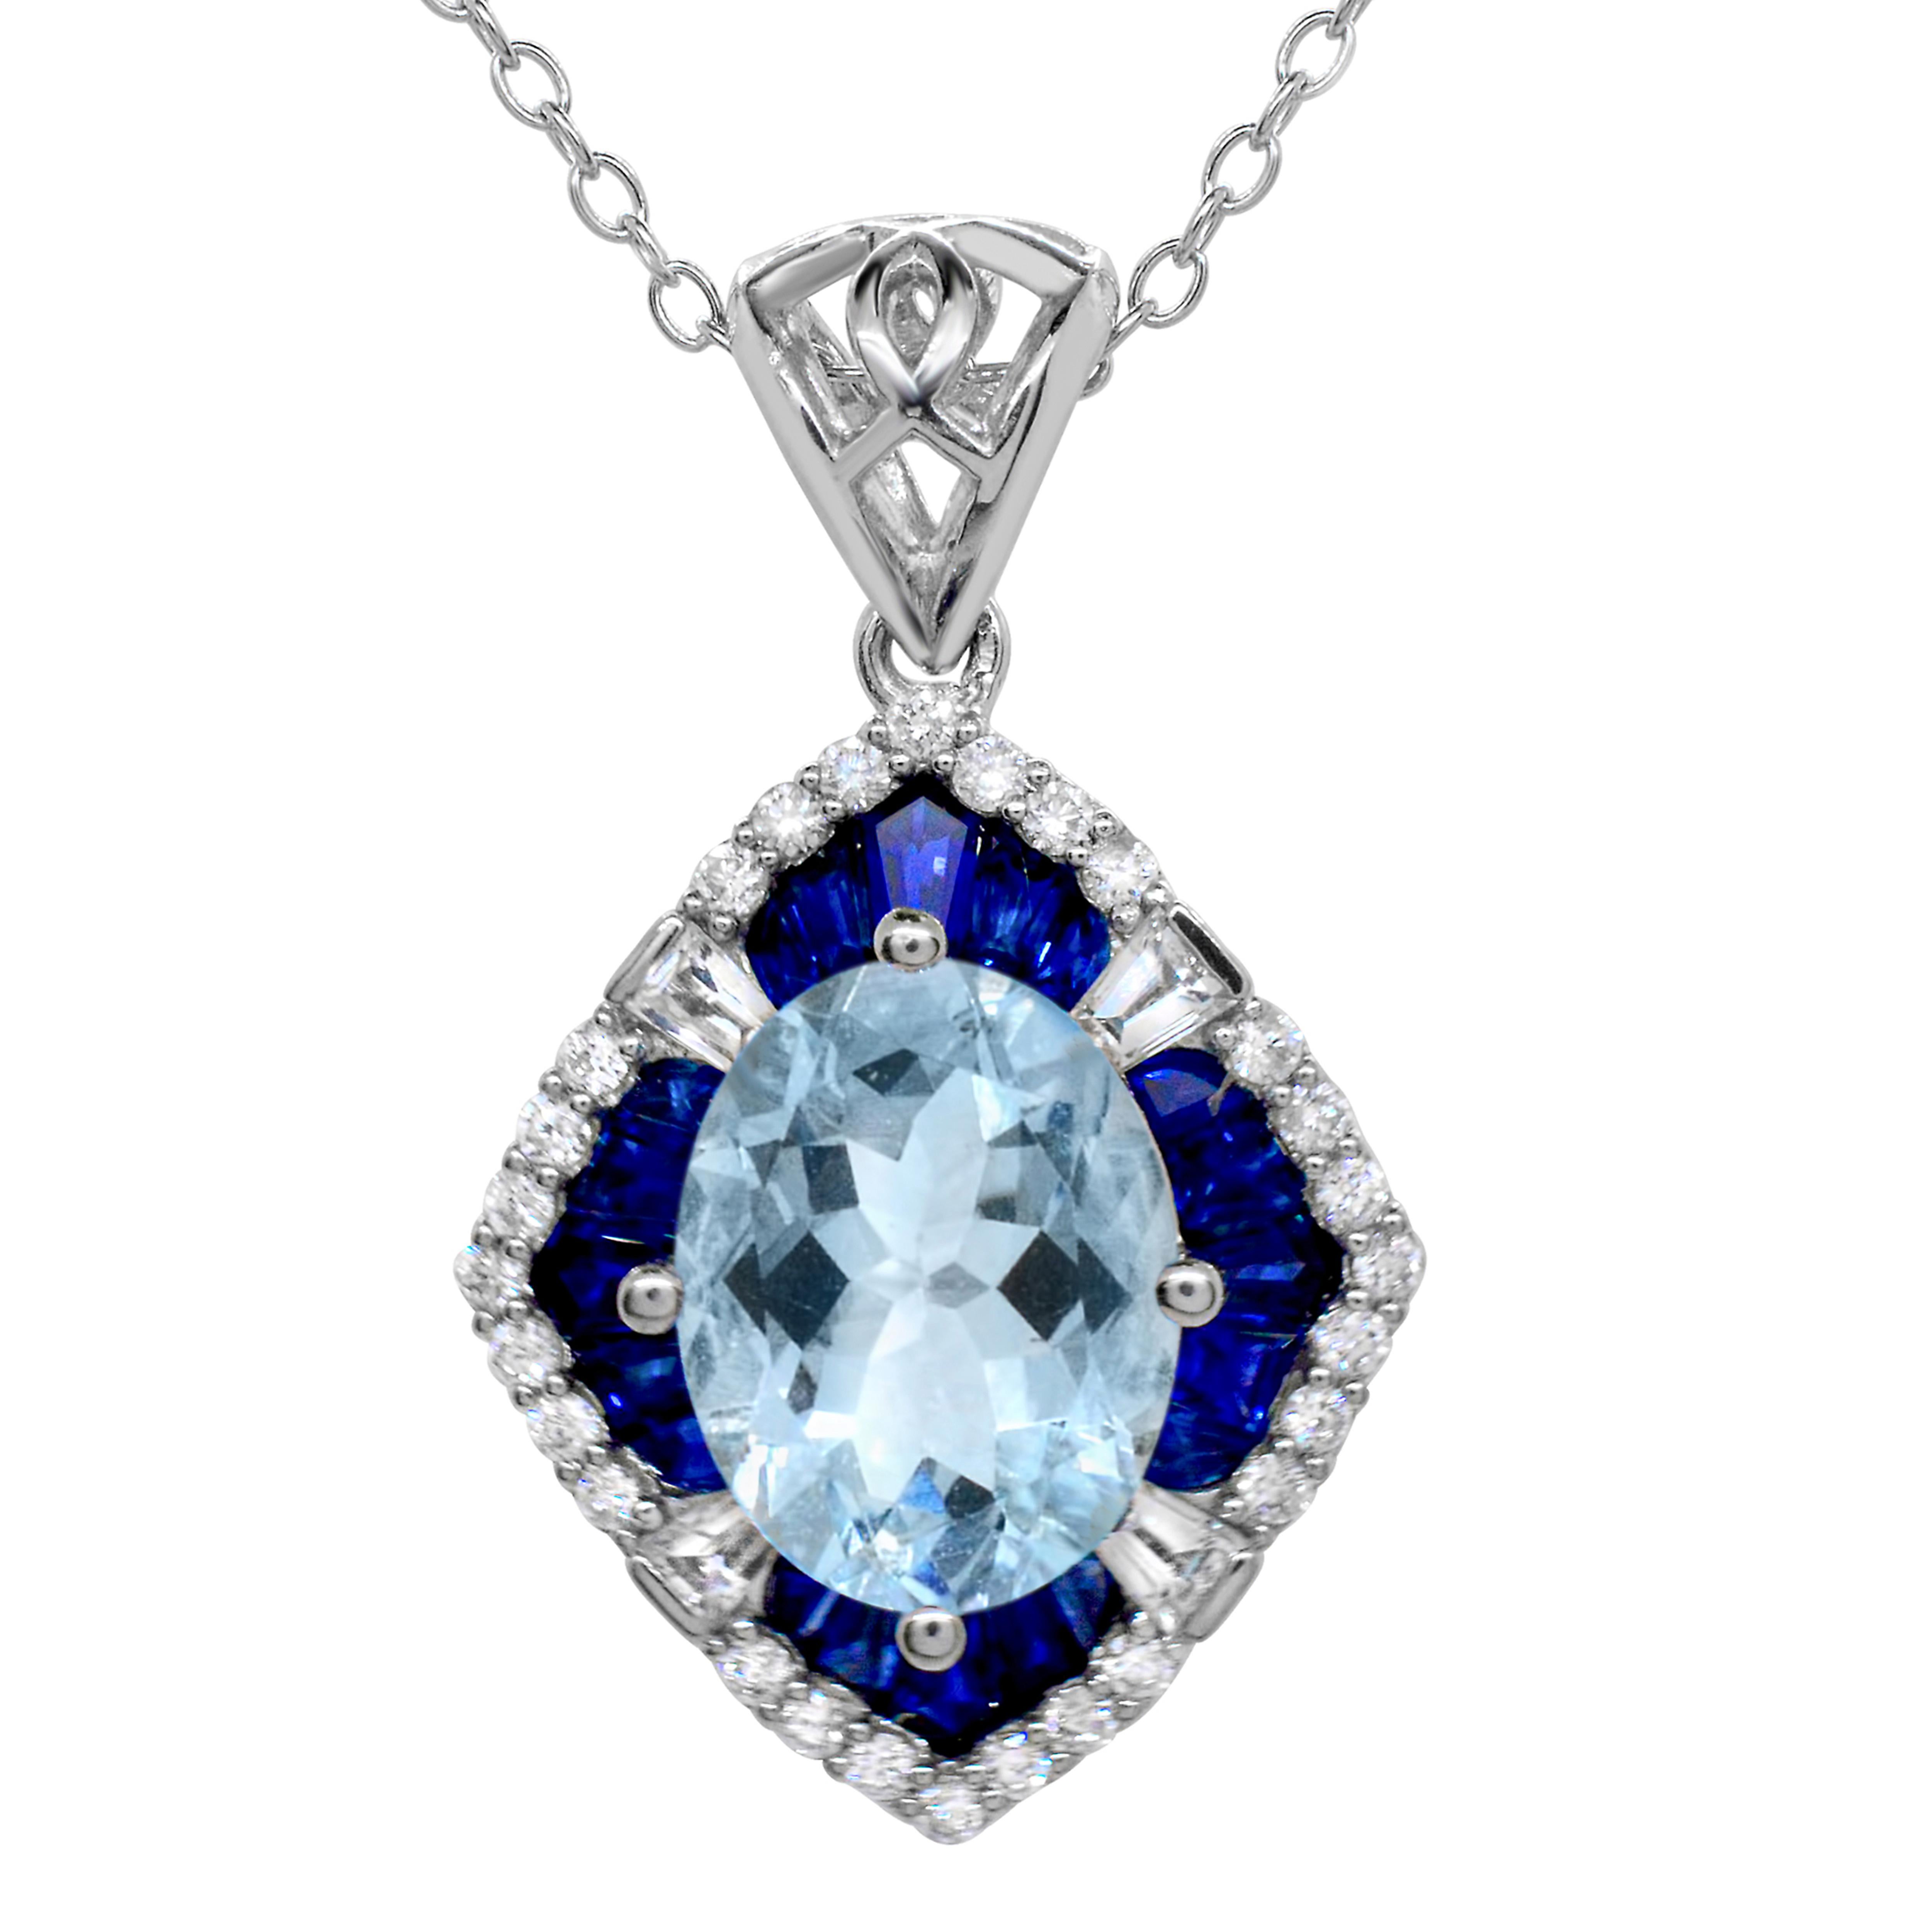 Lovely for any gemstone enthusiast but an especially fine choice as your signature March birthstone piece. Crafted in 14K White Gold, this lovely piece features 10x8 Oval Aquamarine framed with White Sapphire and Blue Baguettes with 0.22 carats of